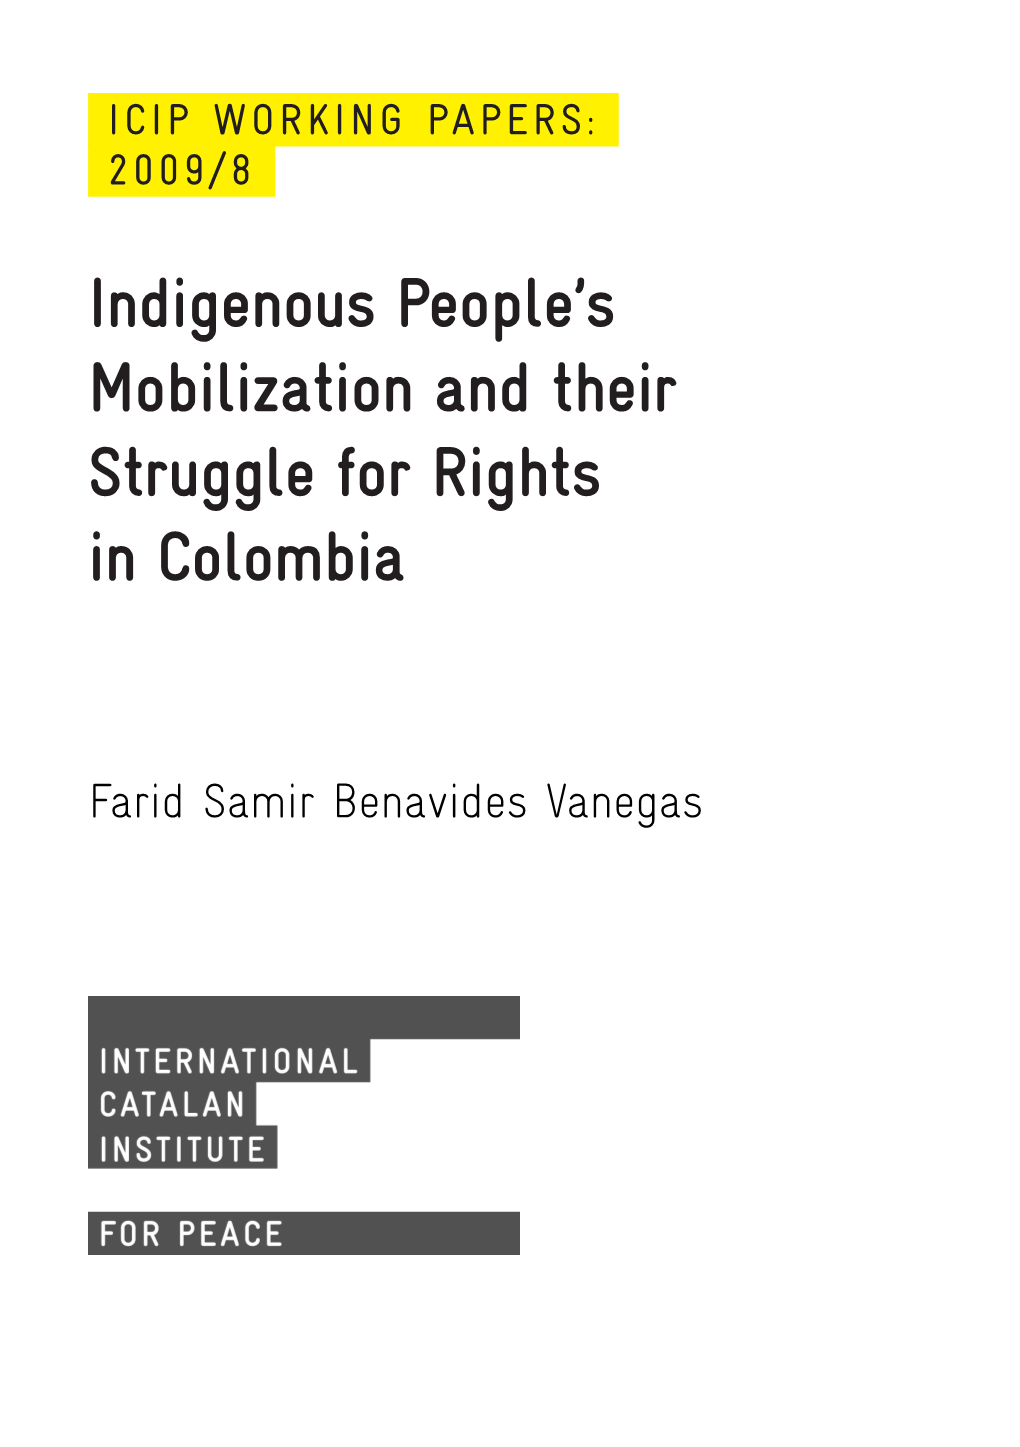 Indigenous People's Mobilization and Their Struggle for Rights in Colombia